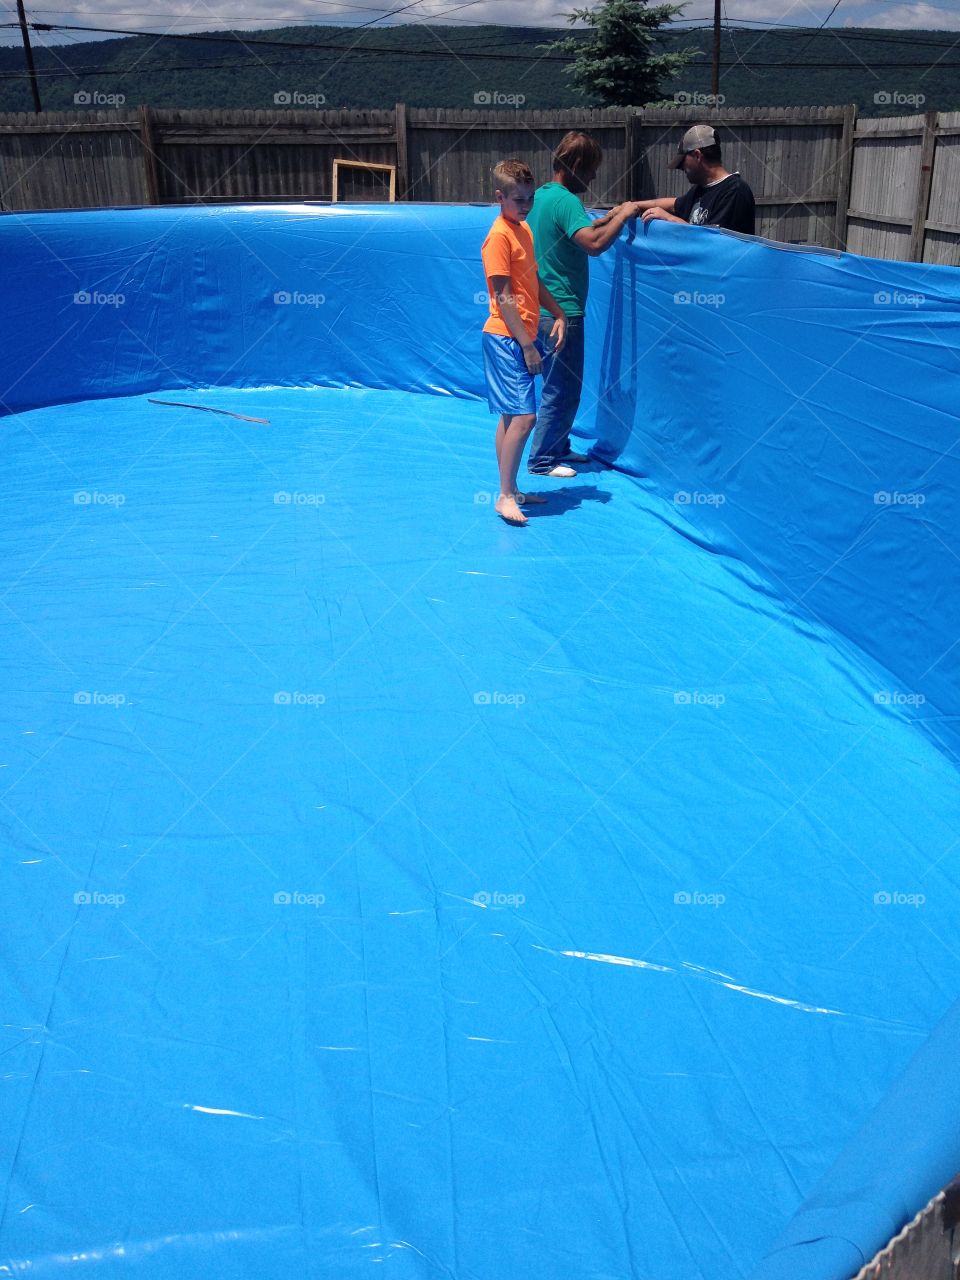 Installing a pool liner. Installing a liner in a 15x30 swimming pool